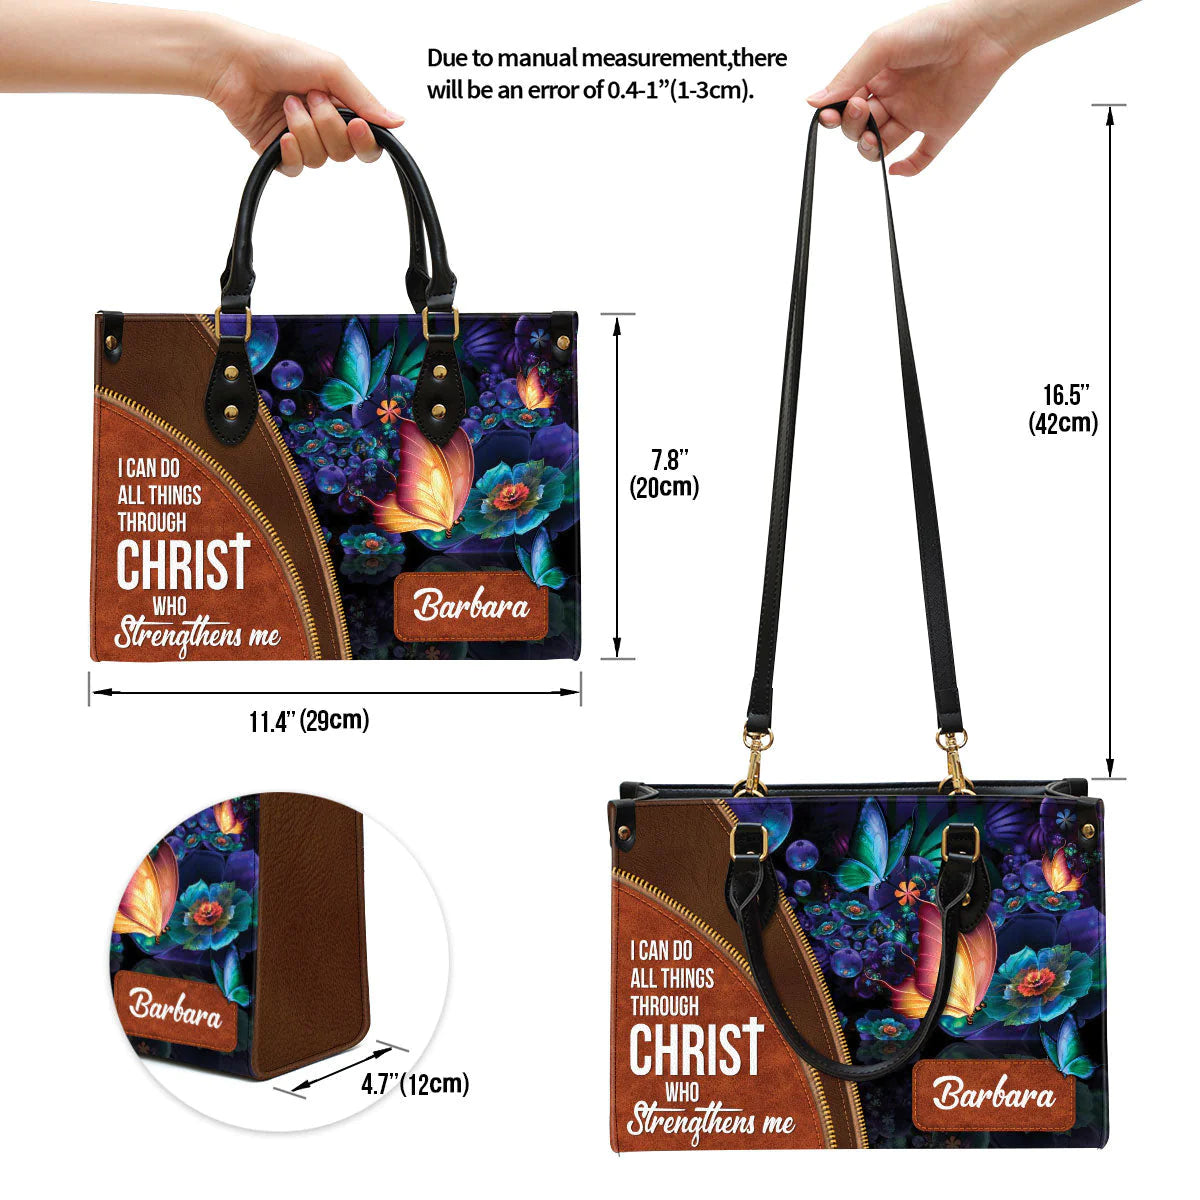 Christianartbag Handbags, I Can Do All Things Through Christ Leather Bags, Personalized Bags, Gifts for Women, Christmas Gift, CABLTB01300723. - Christian Art Bag